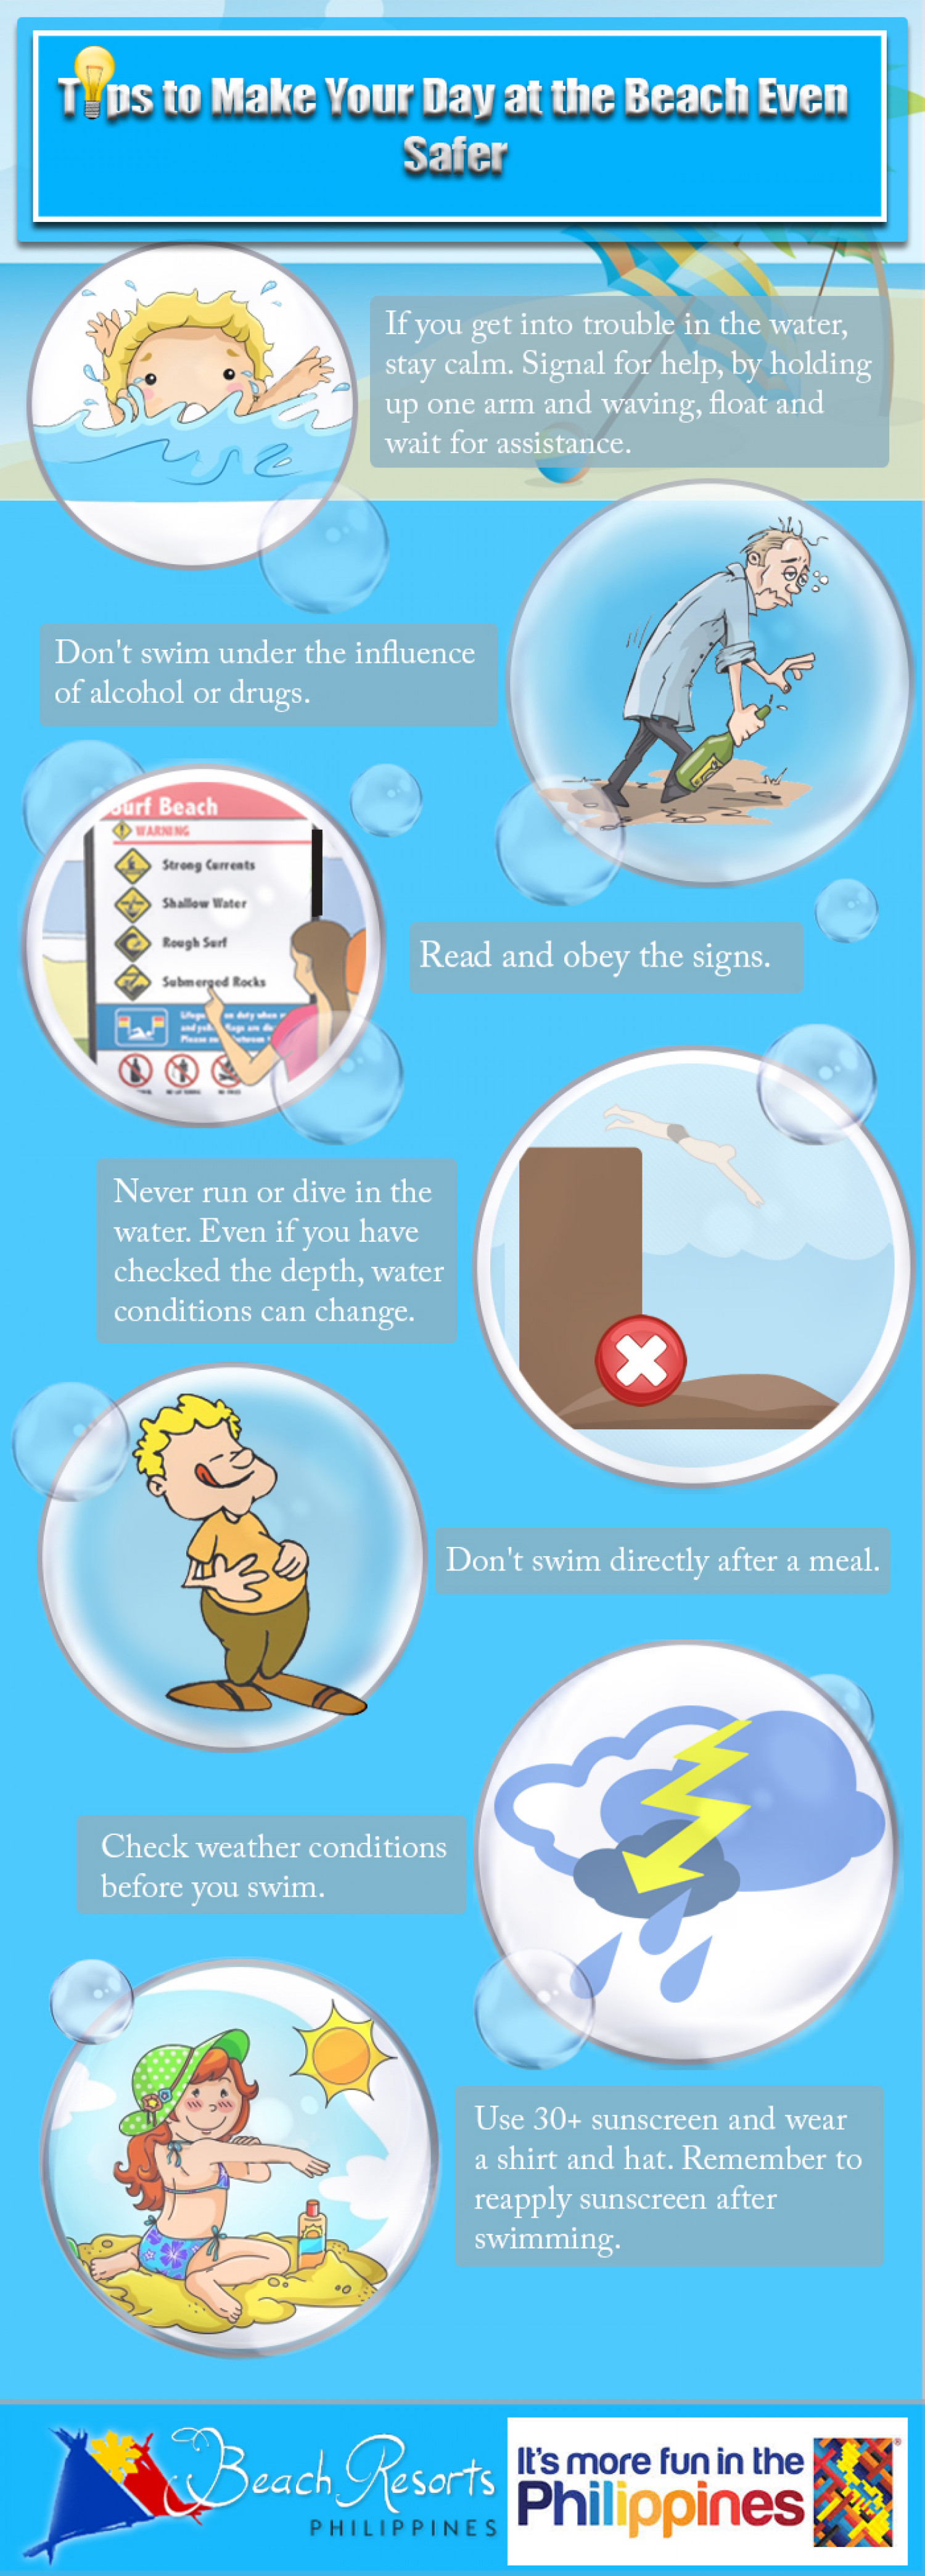 Tips To Make Your Day At The Beach Even Safer Infographic